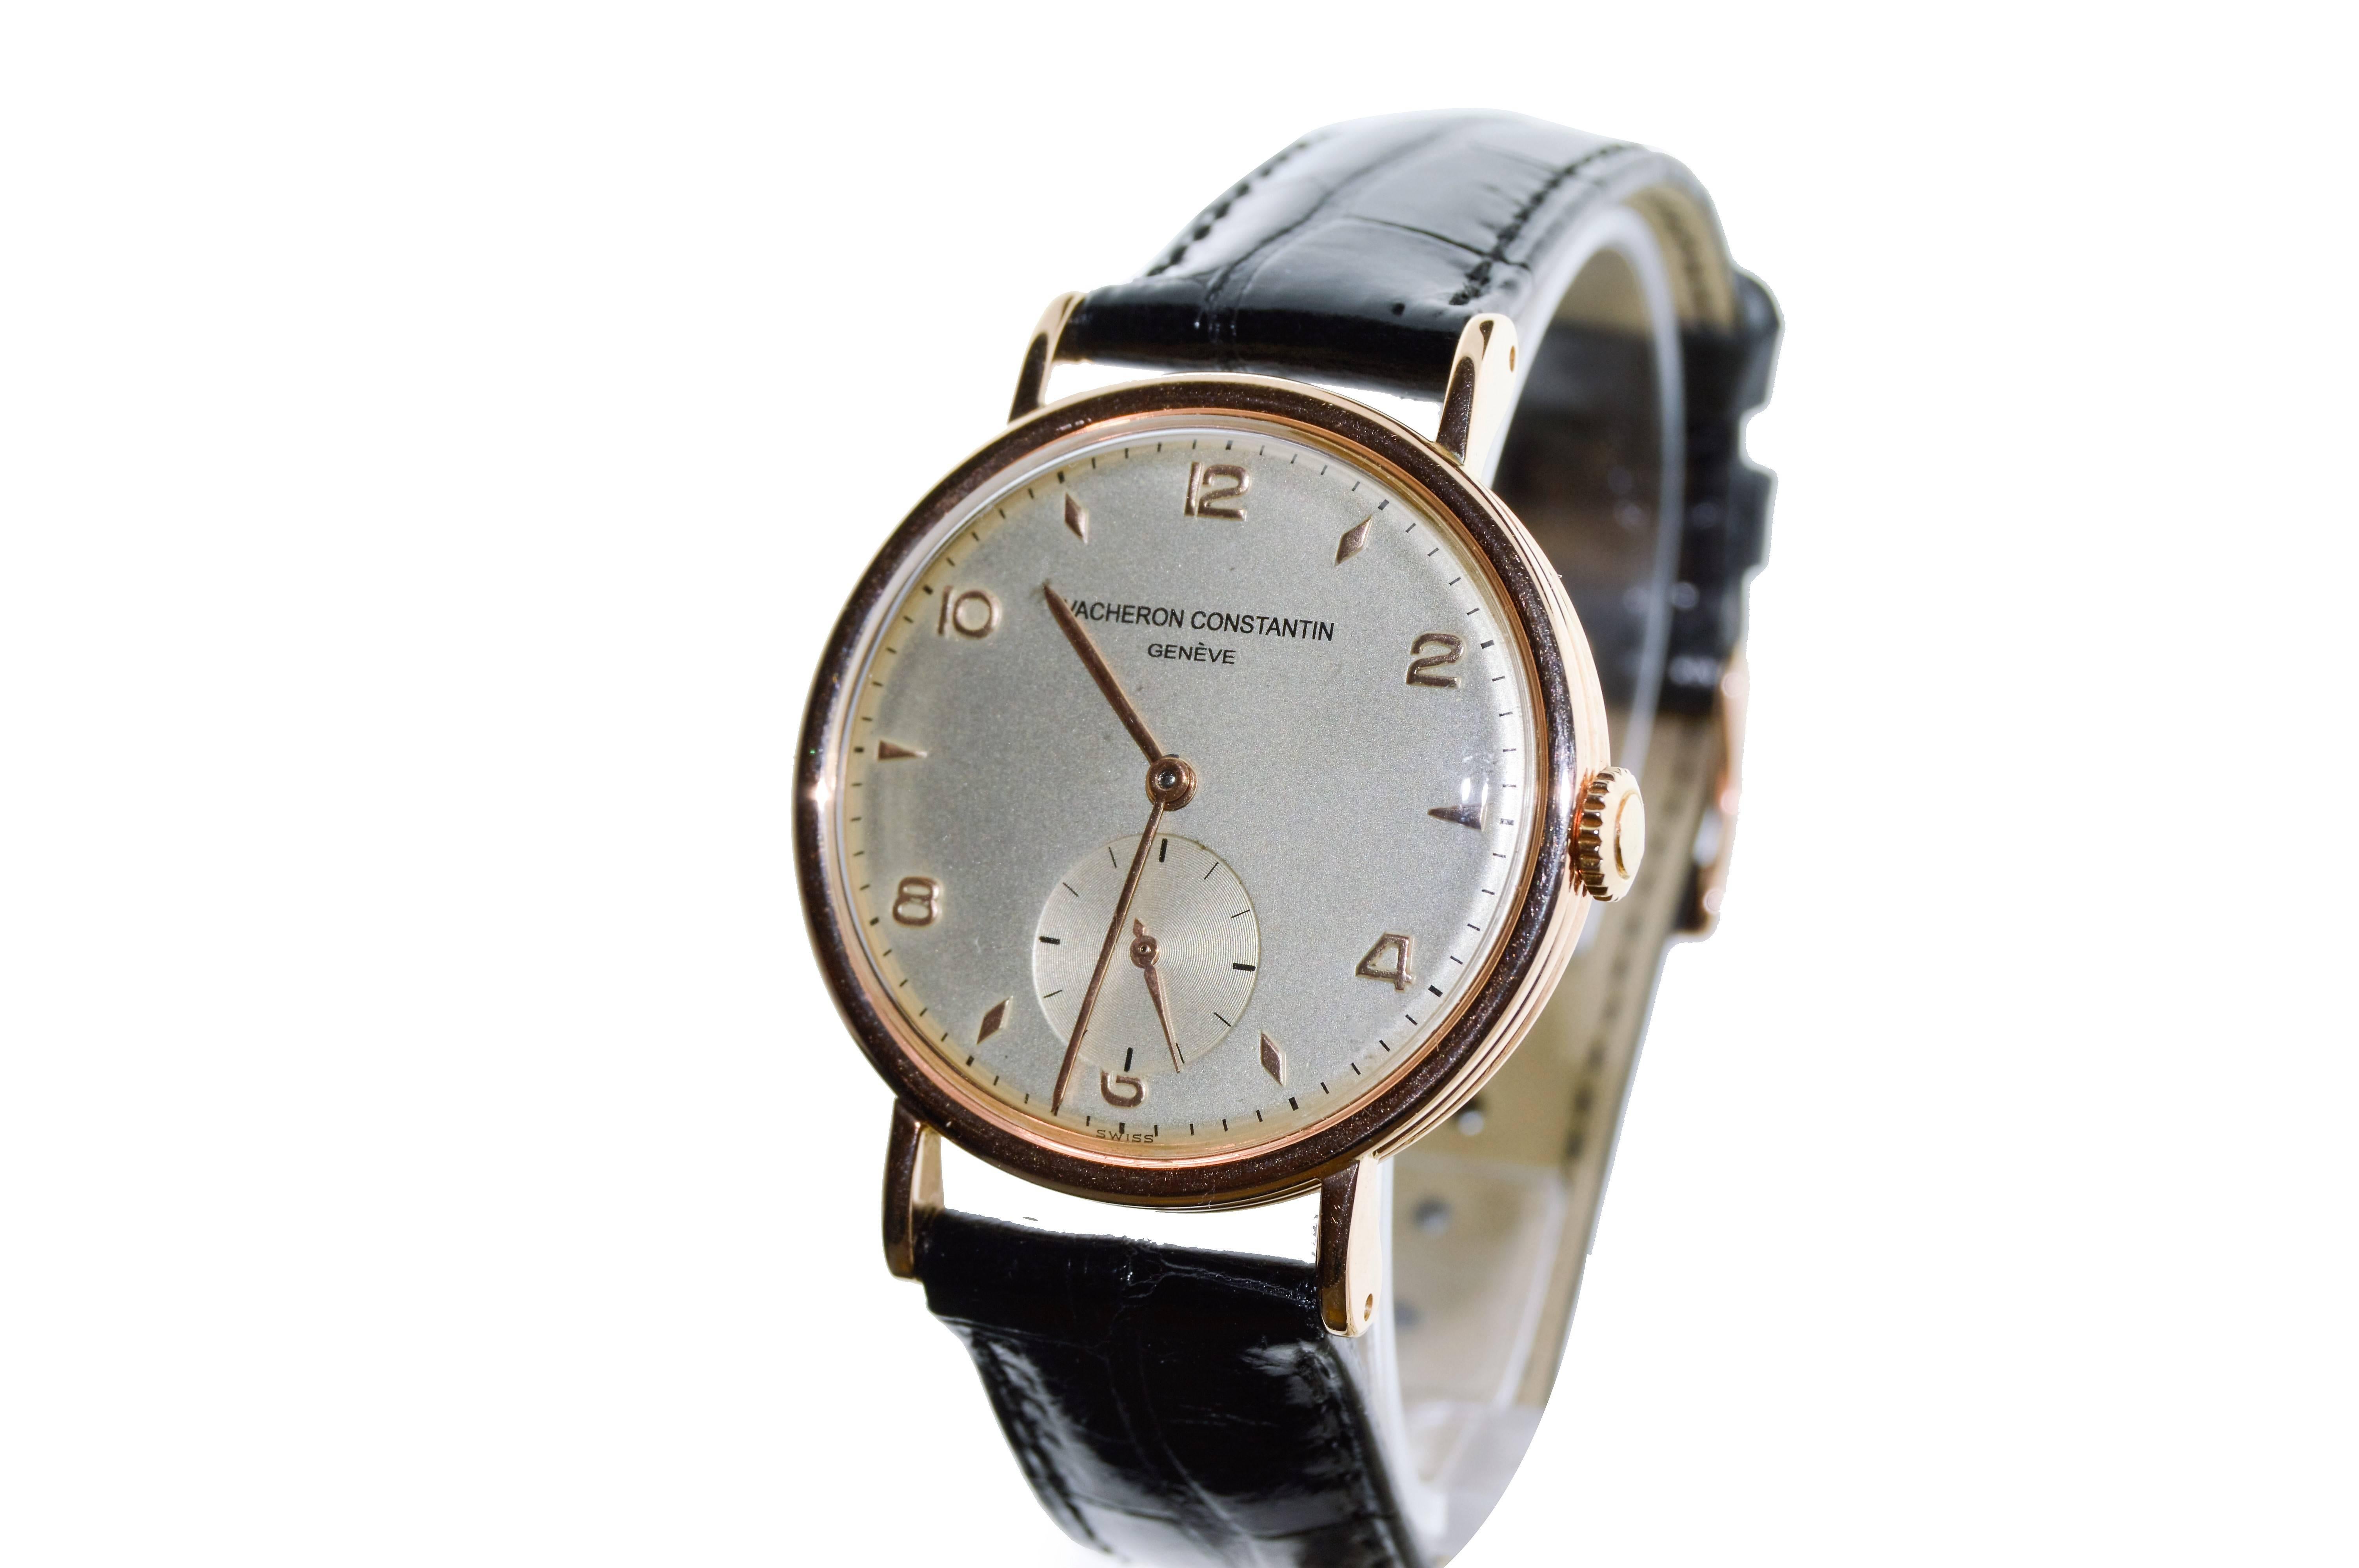 FACTORY / HOUSE: Vacheron Constantin
STYLE / REFERENCE: Round / Art Deco
METAL / MATERIAL: 18Kt. Rose Gold
DIMENSIONS:  41mm  X  33mm
CIRCA: 1940's
MOVEMENT / CALIBER: 17 Jewels 
DIAL / HANDS: Arabic & Batons / Solid Rose Gold Baton Hands
ATTACHMENT